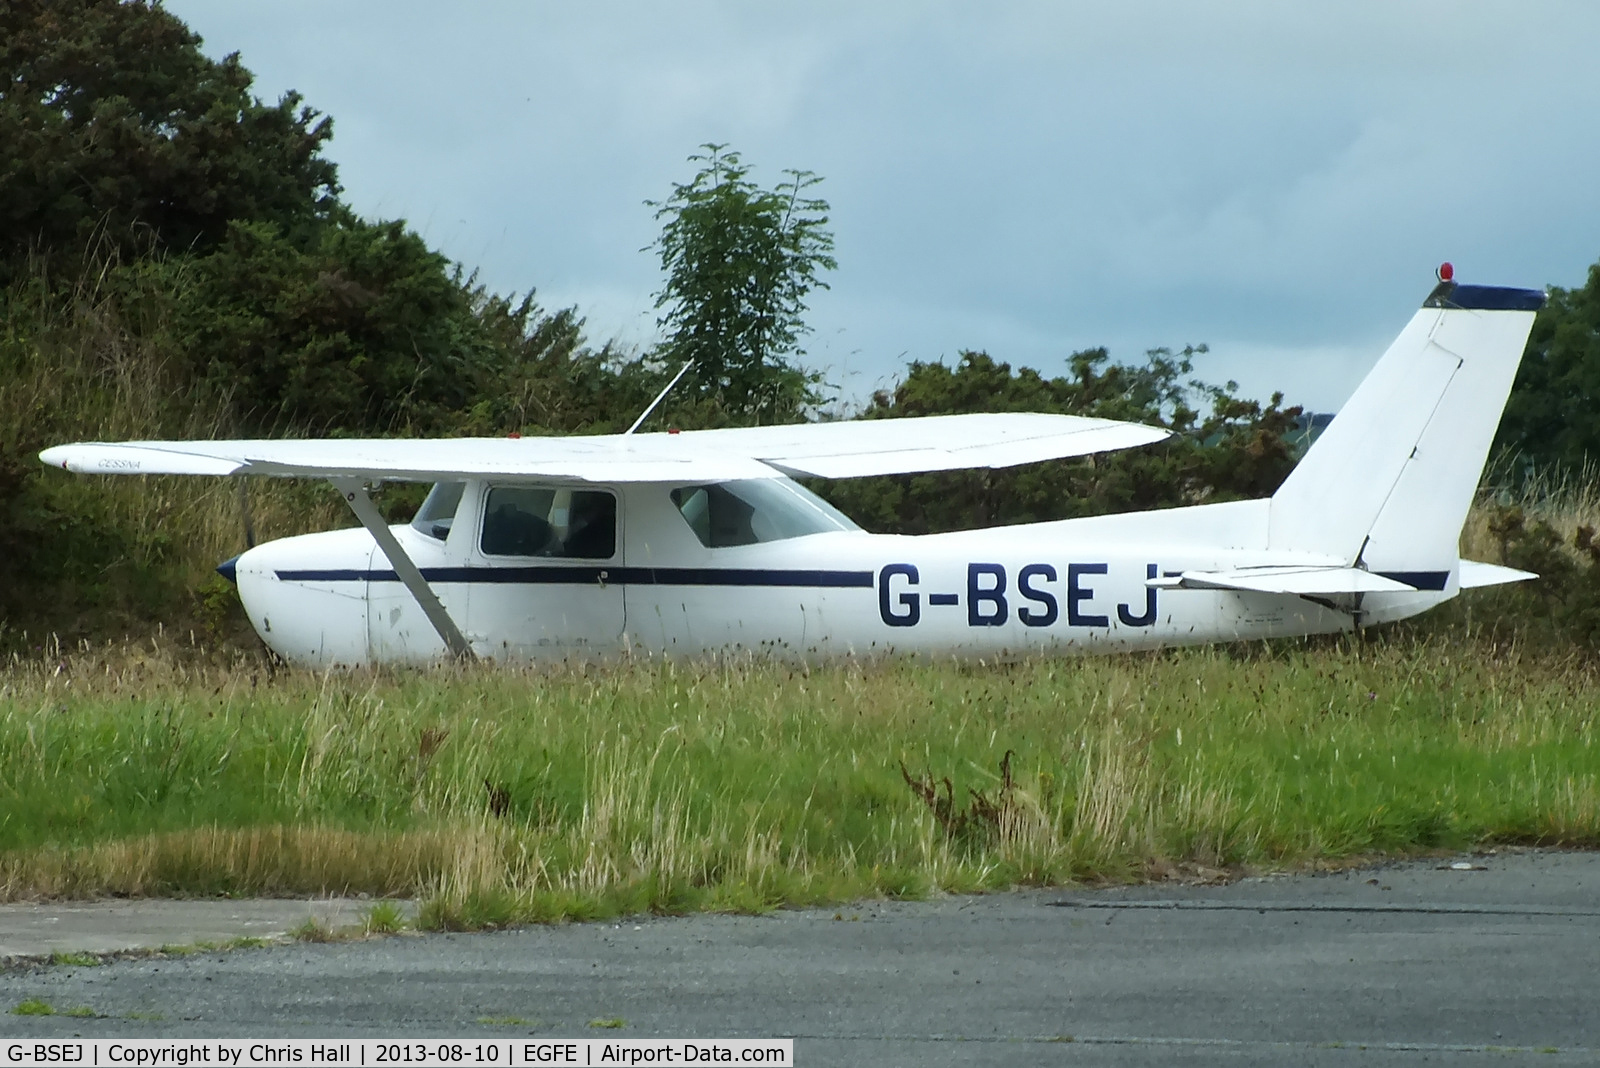 G-BSEJ, 1974 Cessna 150M C/N 150-76261, privately owned